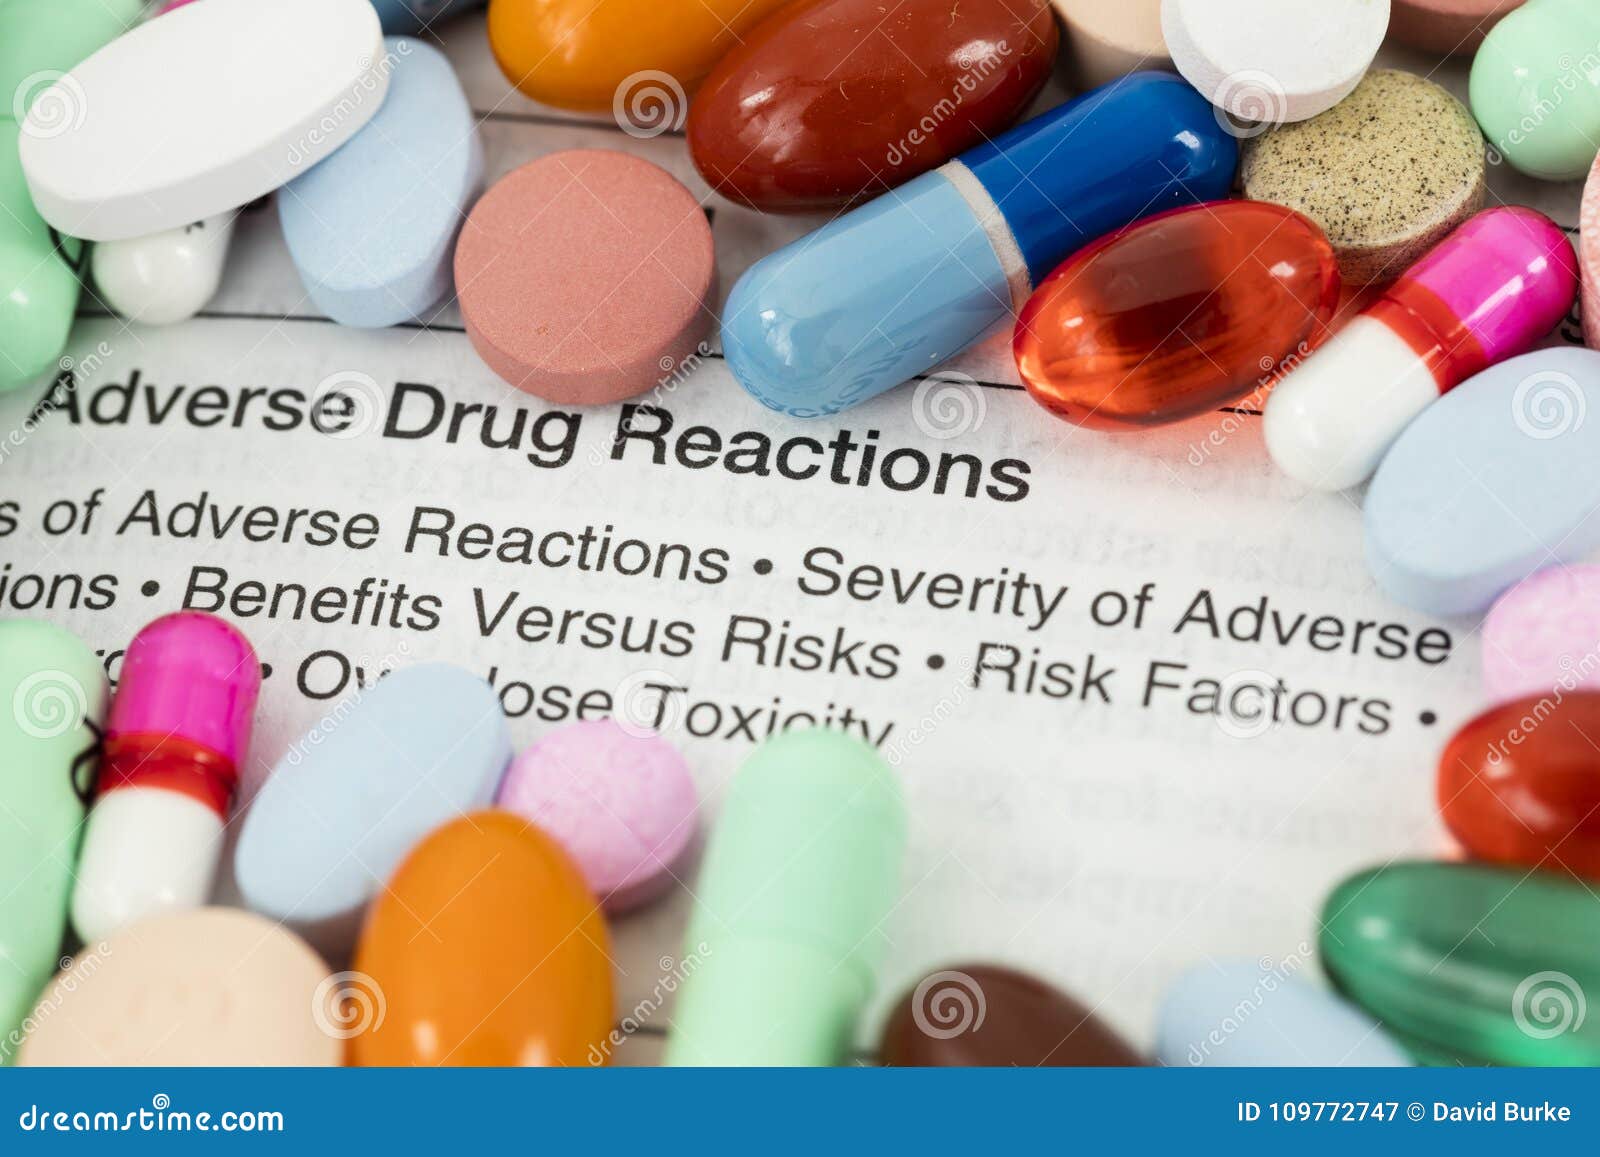 adverse drug reactions pills narcotics illegal drugs reaction overdose